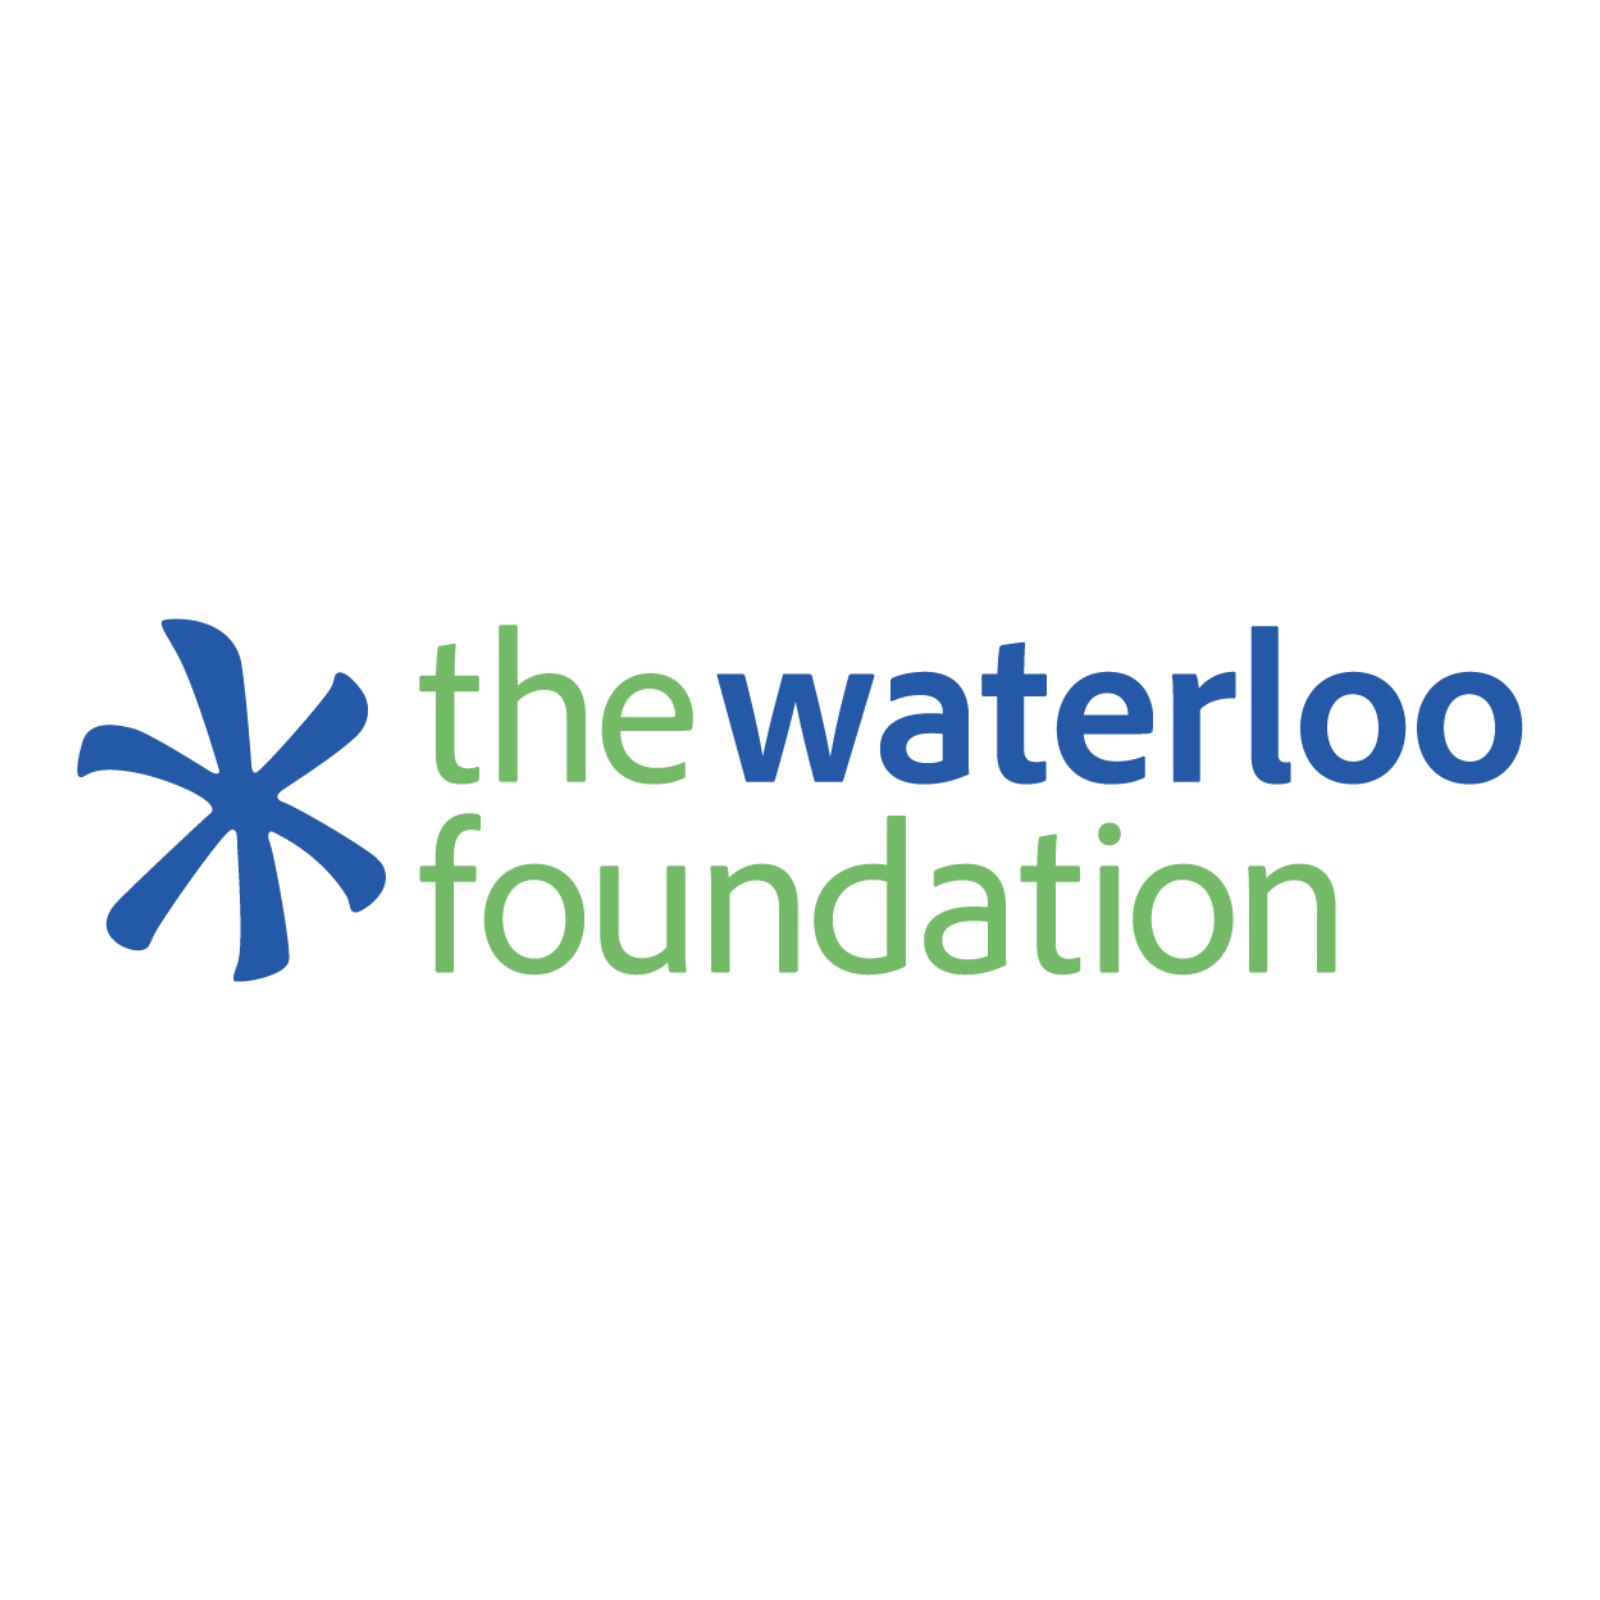 The logo for the Waterloo Foundation